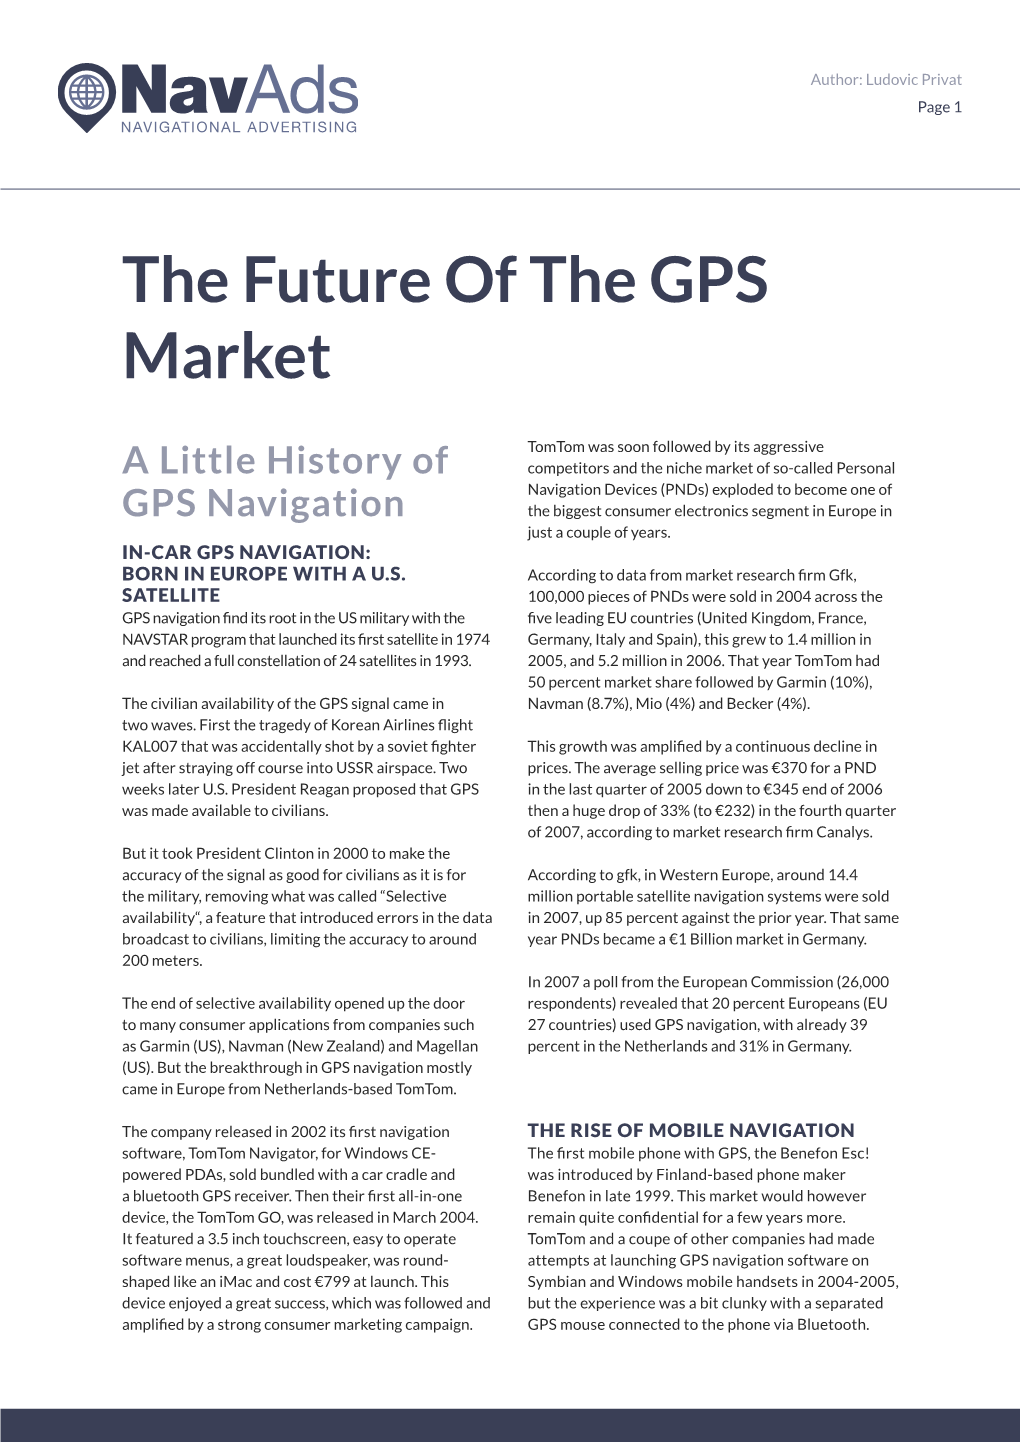 The Future of the GPS Market